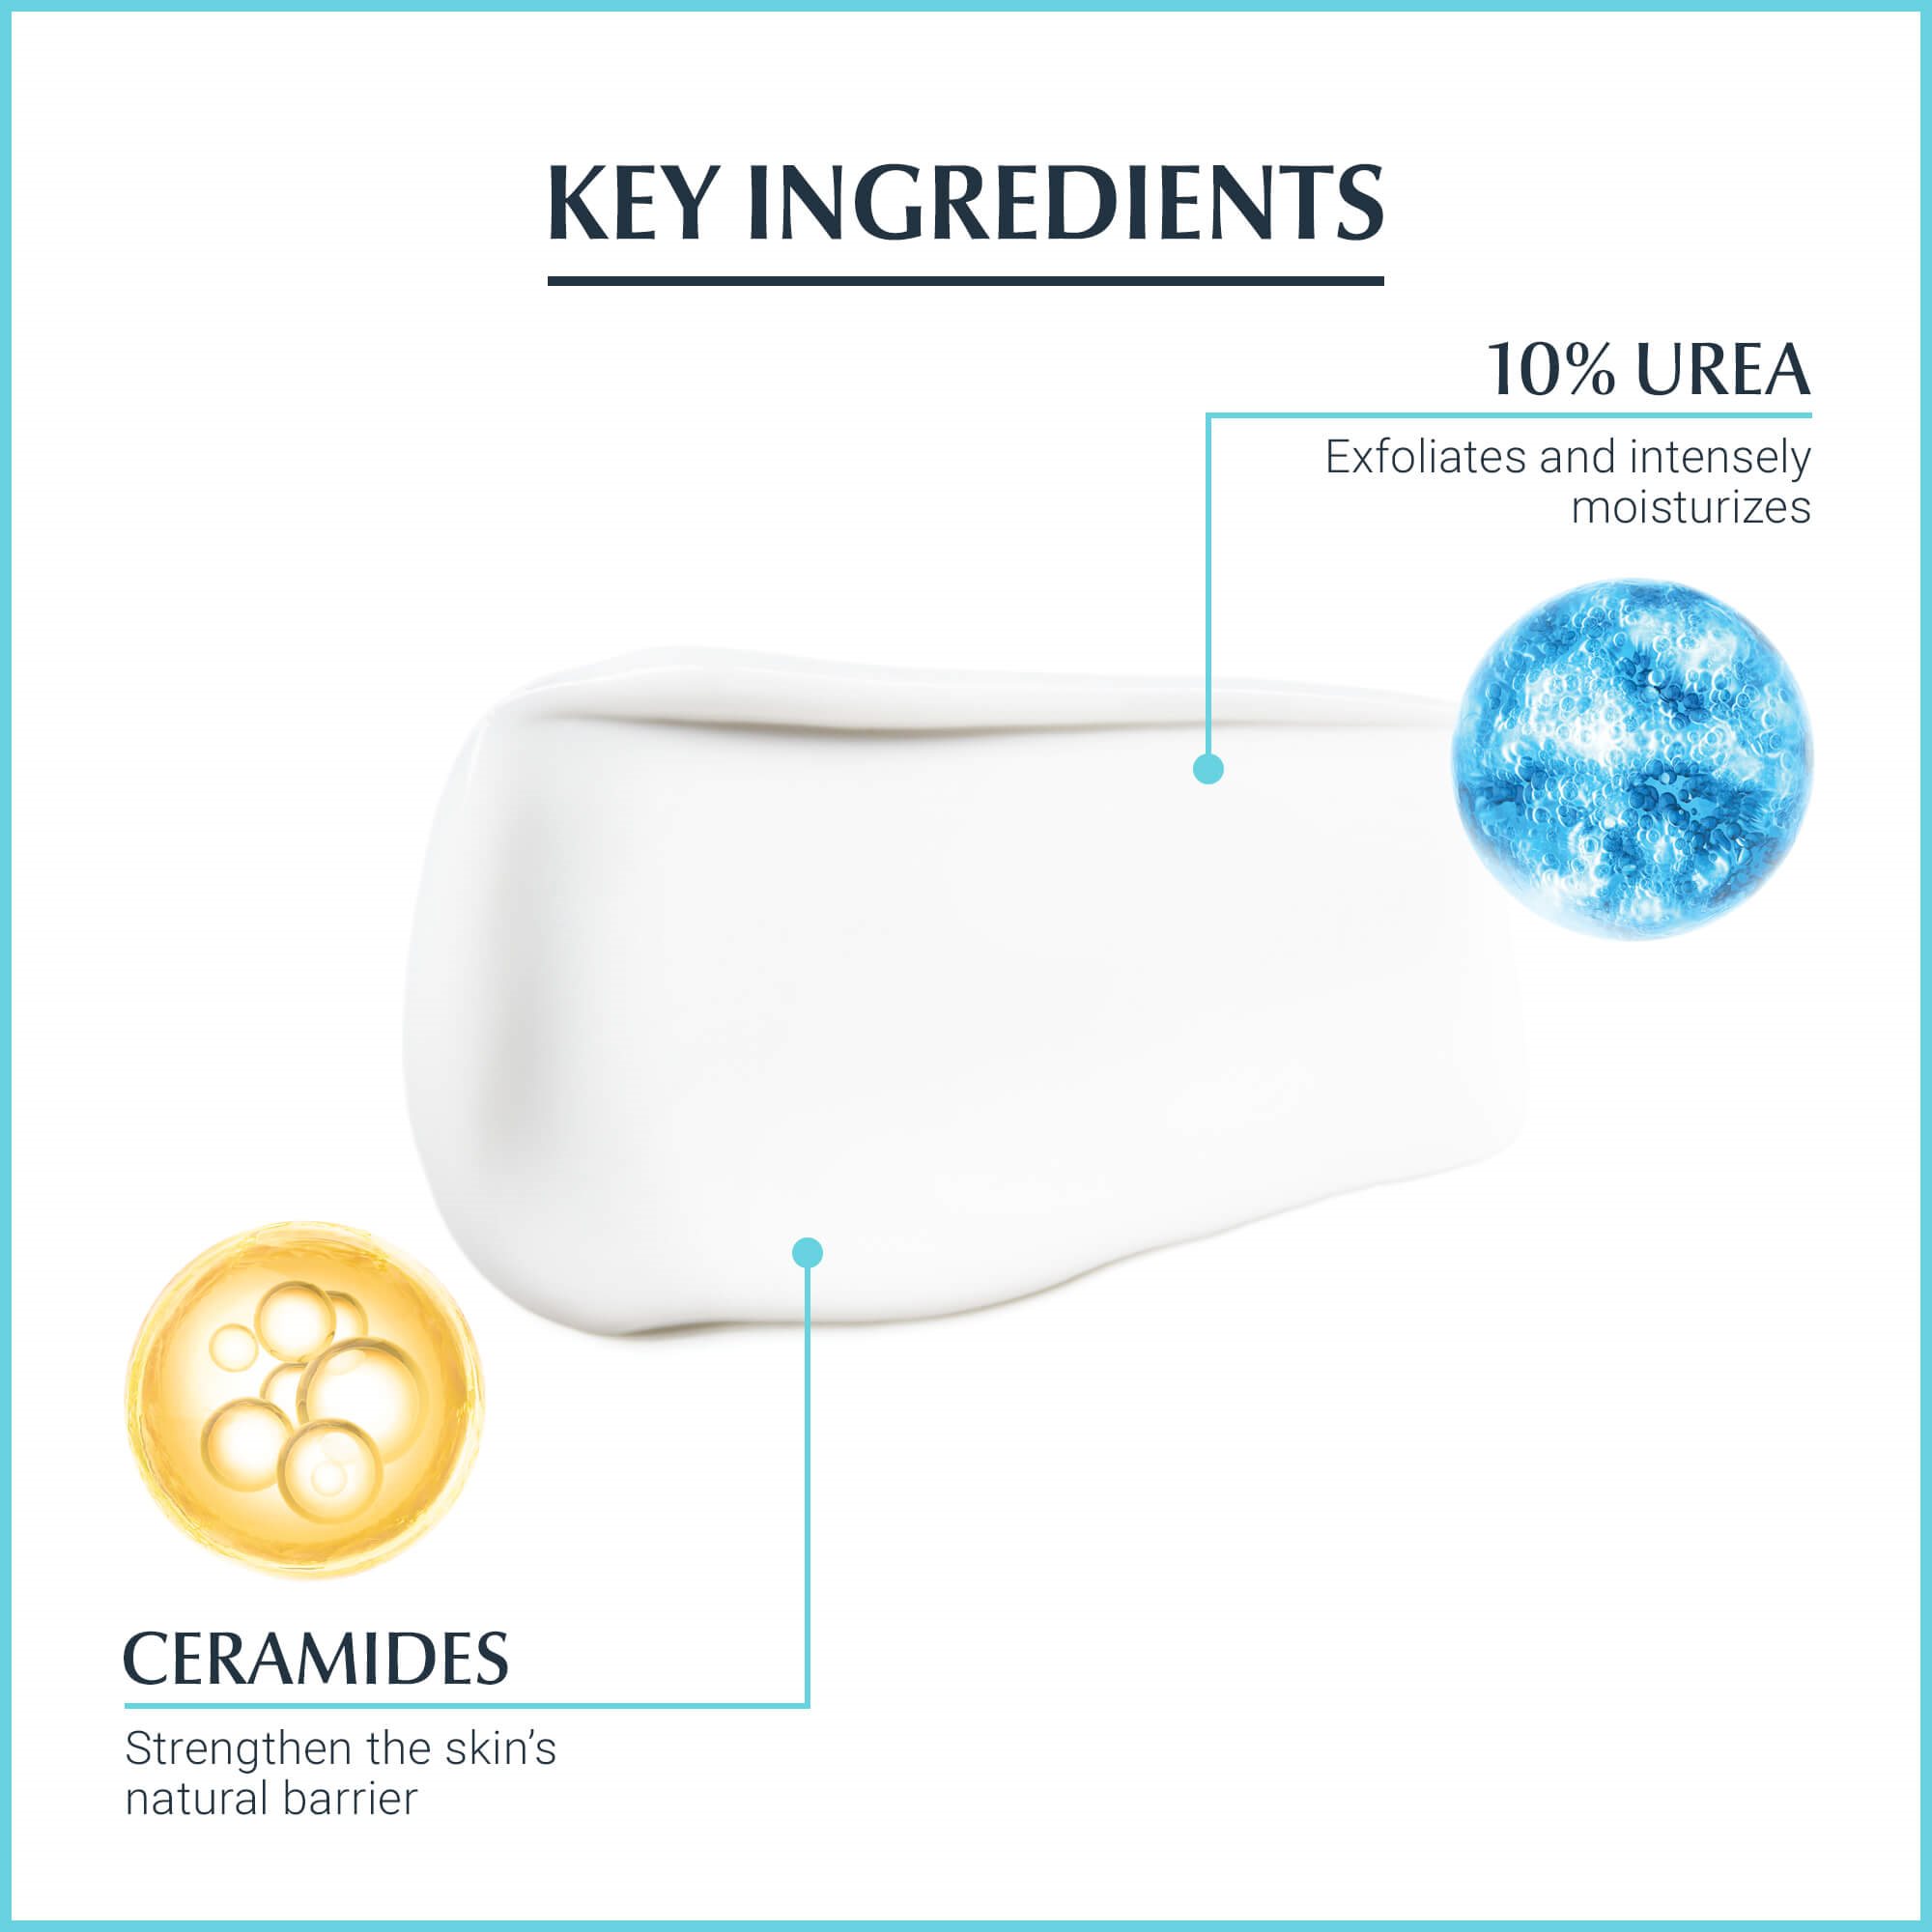 Image of the benefits of ceramides and urea in Eucerin Complete Repair Lotion Plus.